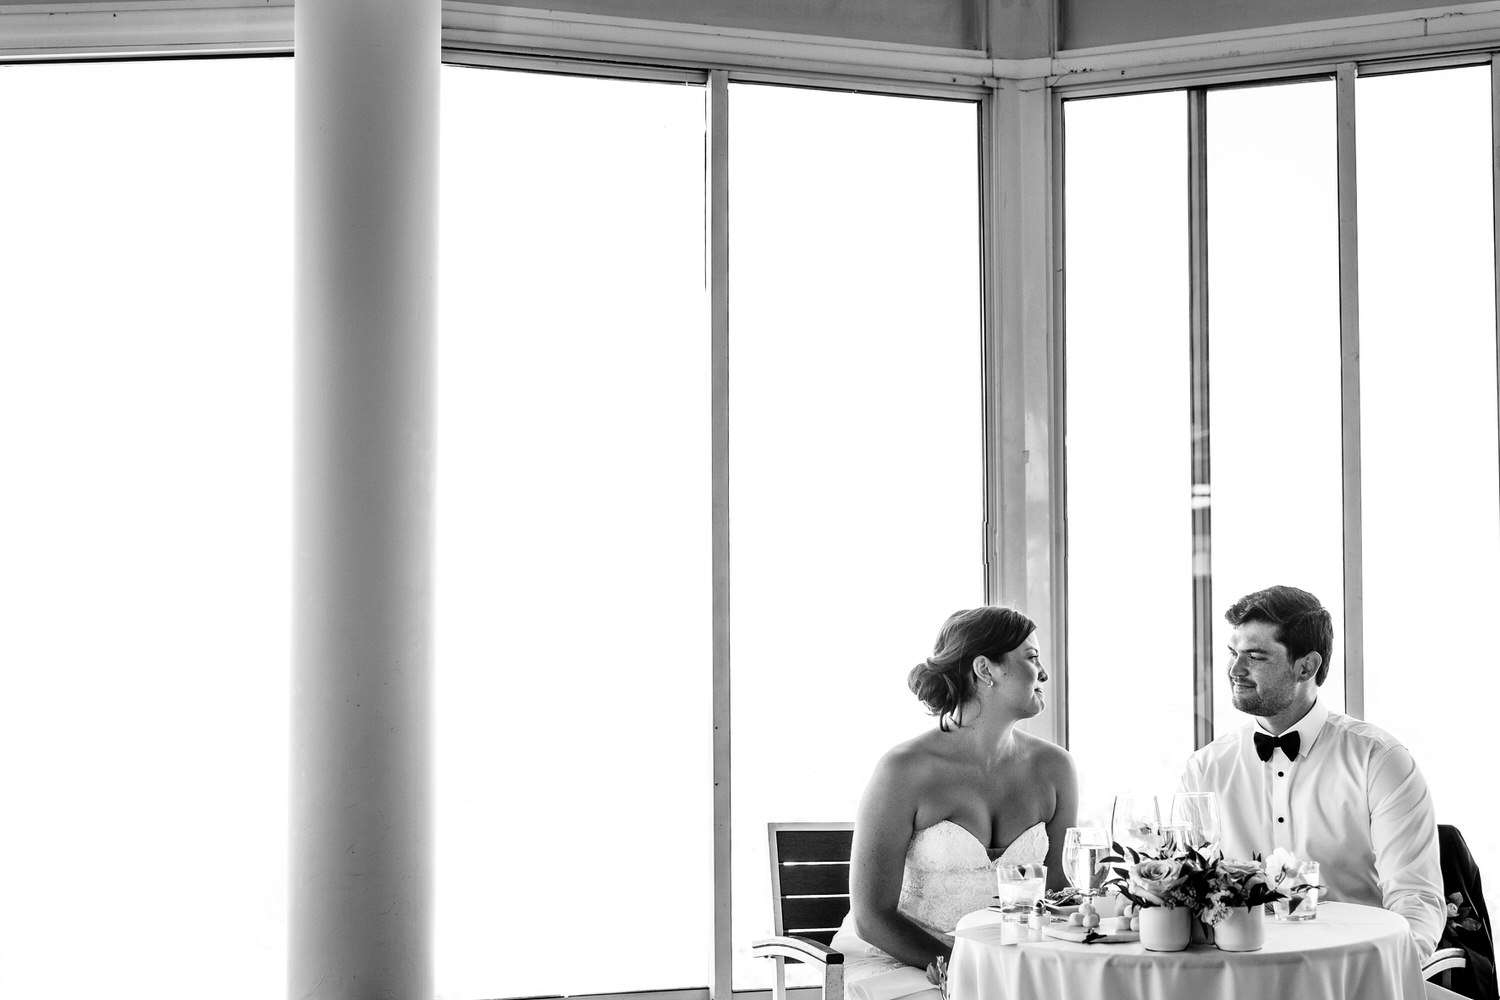 A sweet candid moment between the bride and groom at dinnertime, captured by Lake Tahoe wedding photographer Chris Werner.